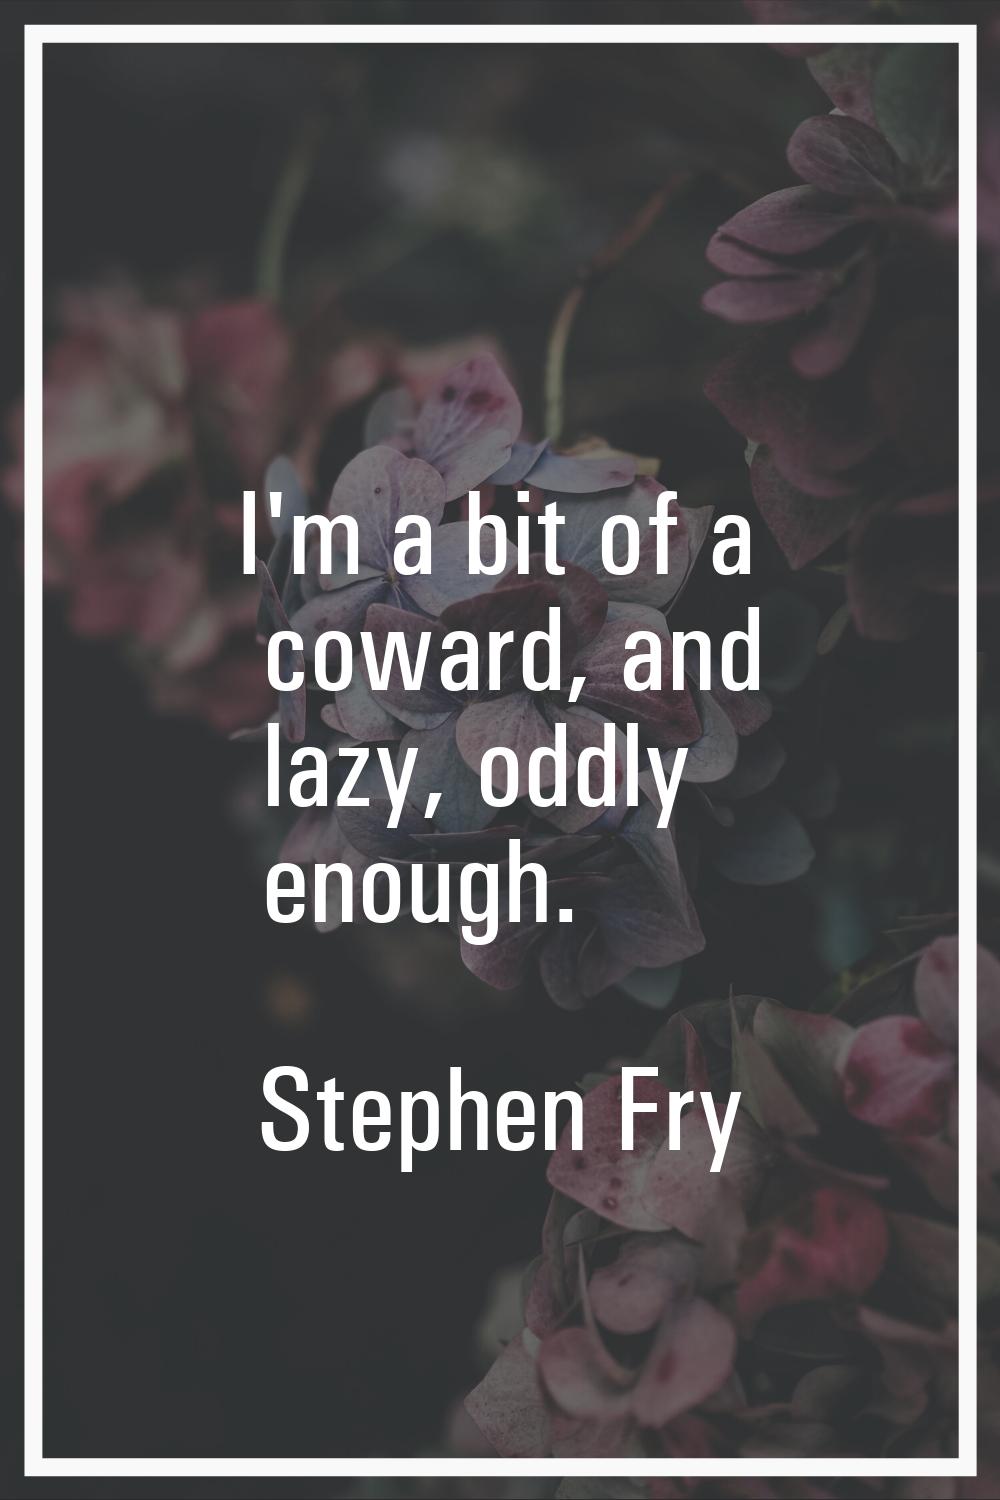 I'm a bit of a coward, and lazy, oddly enough.